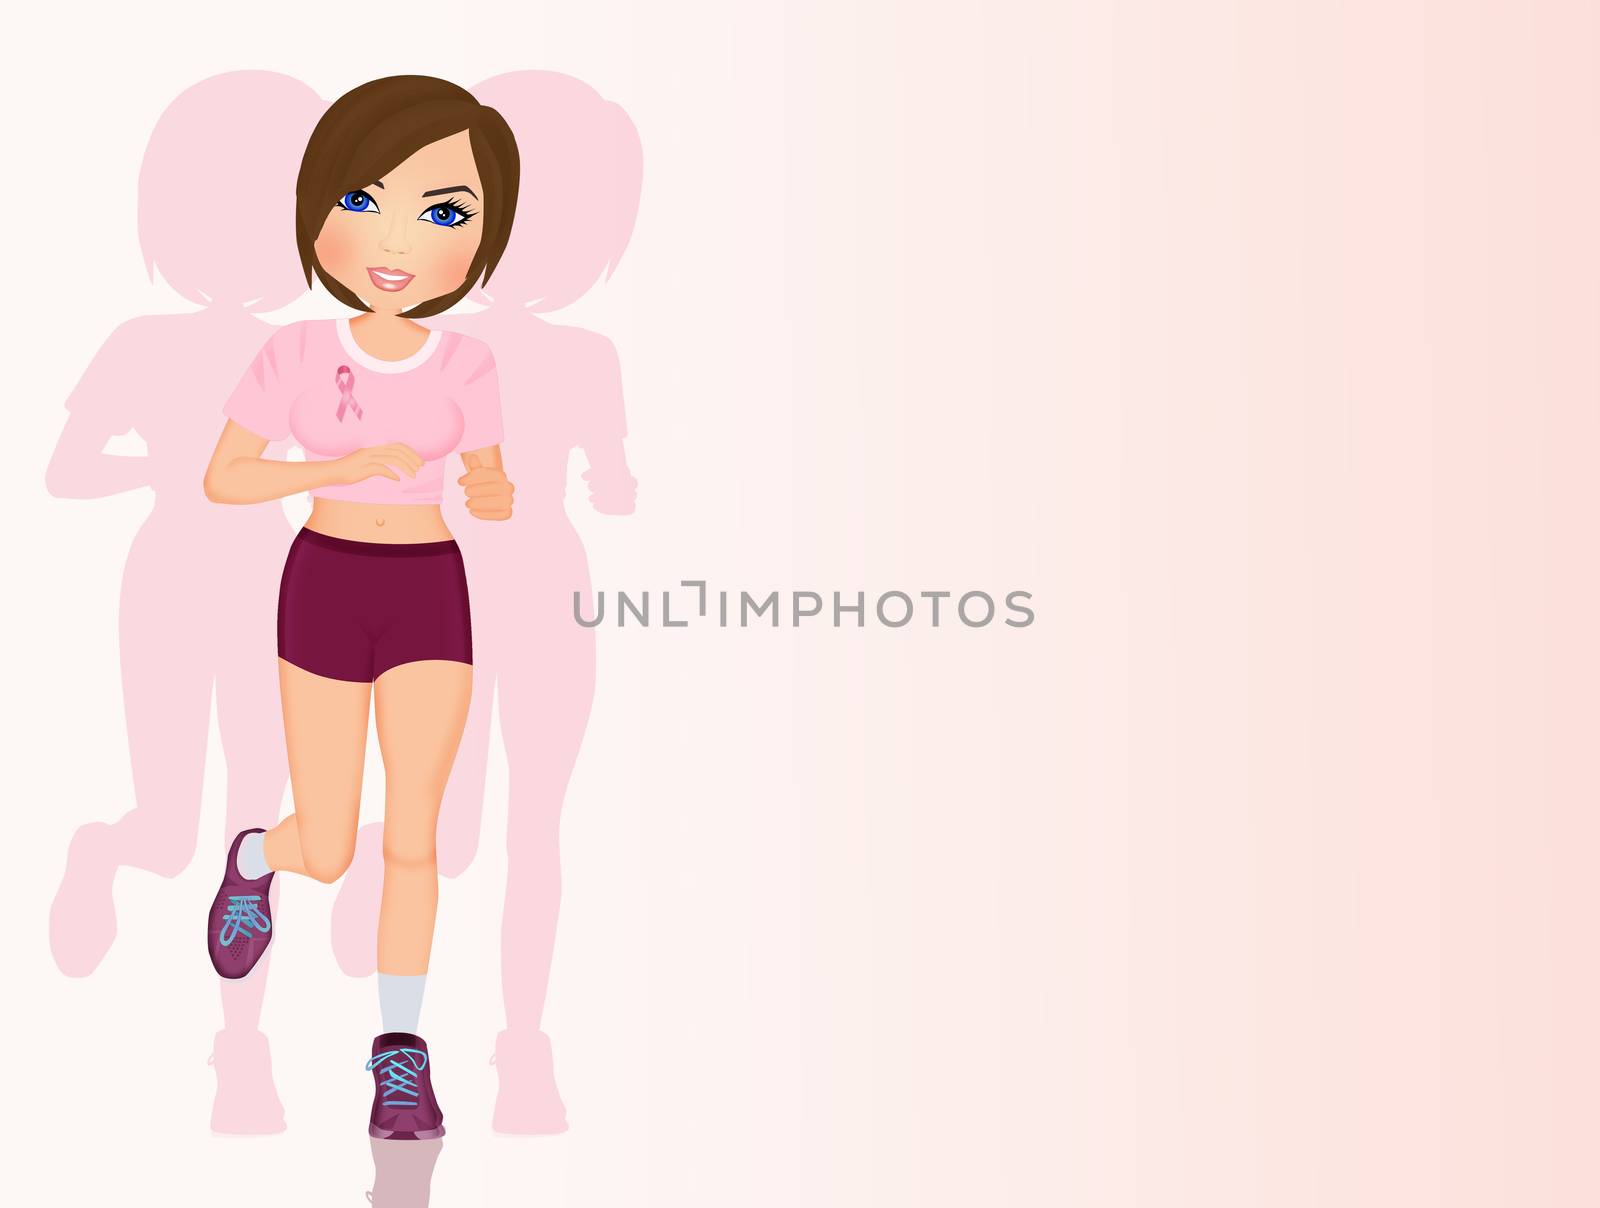 illustration of women in the pink race